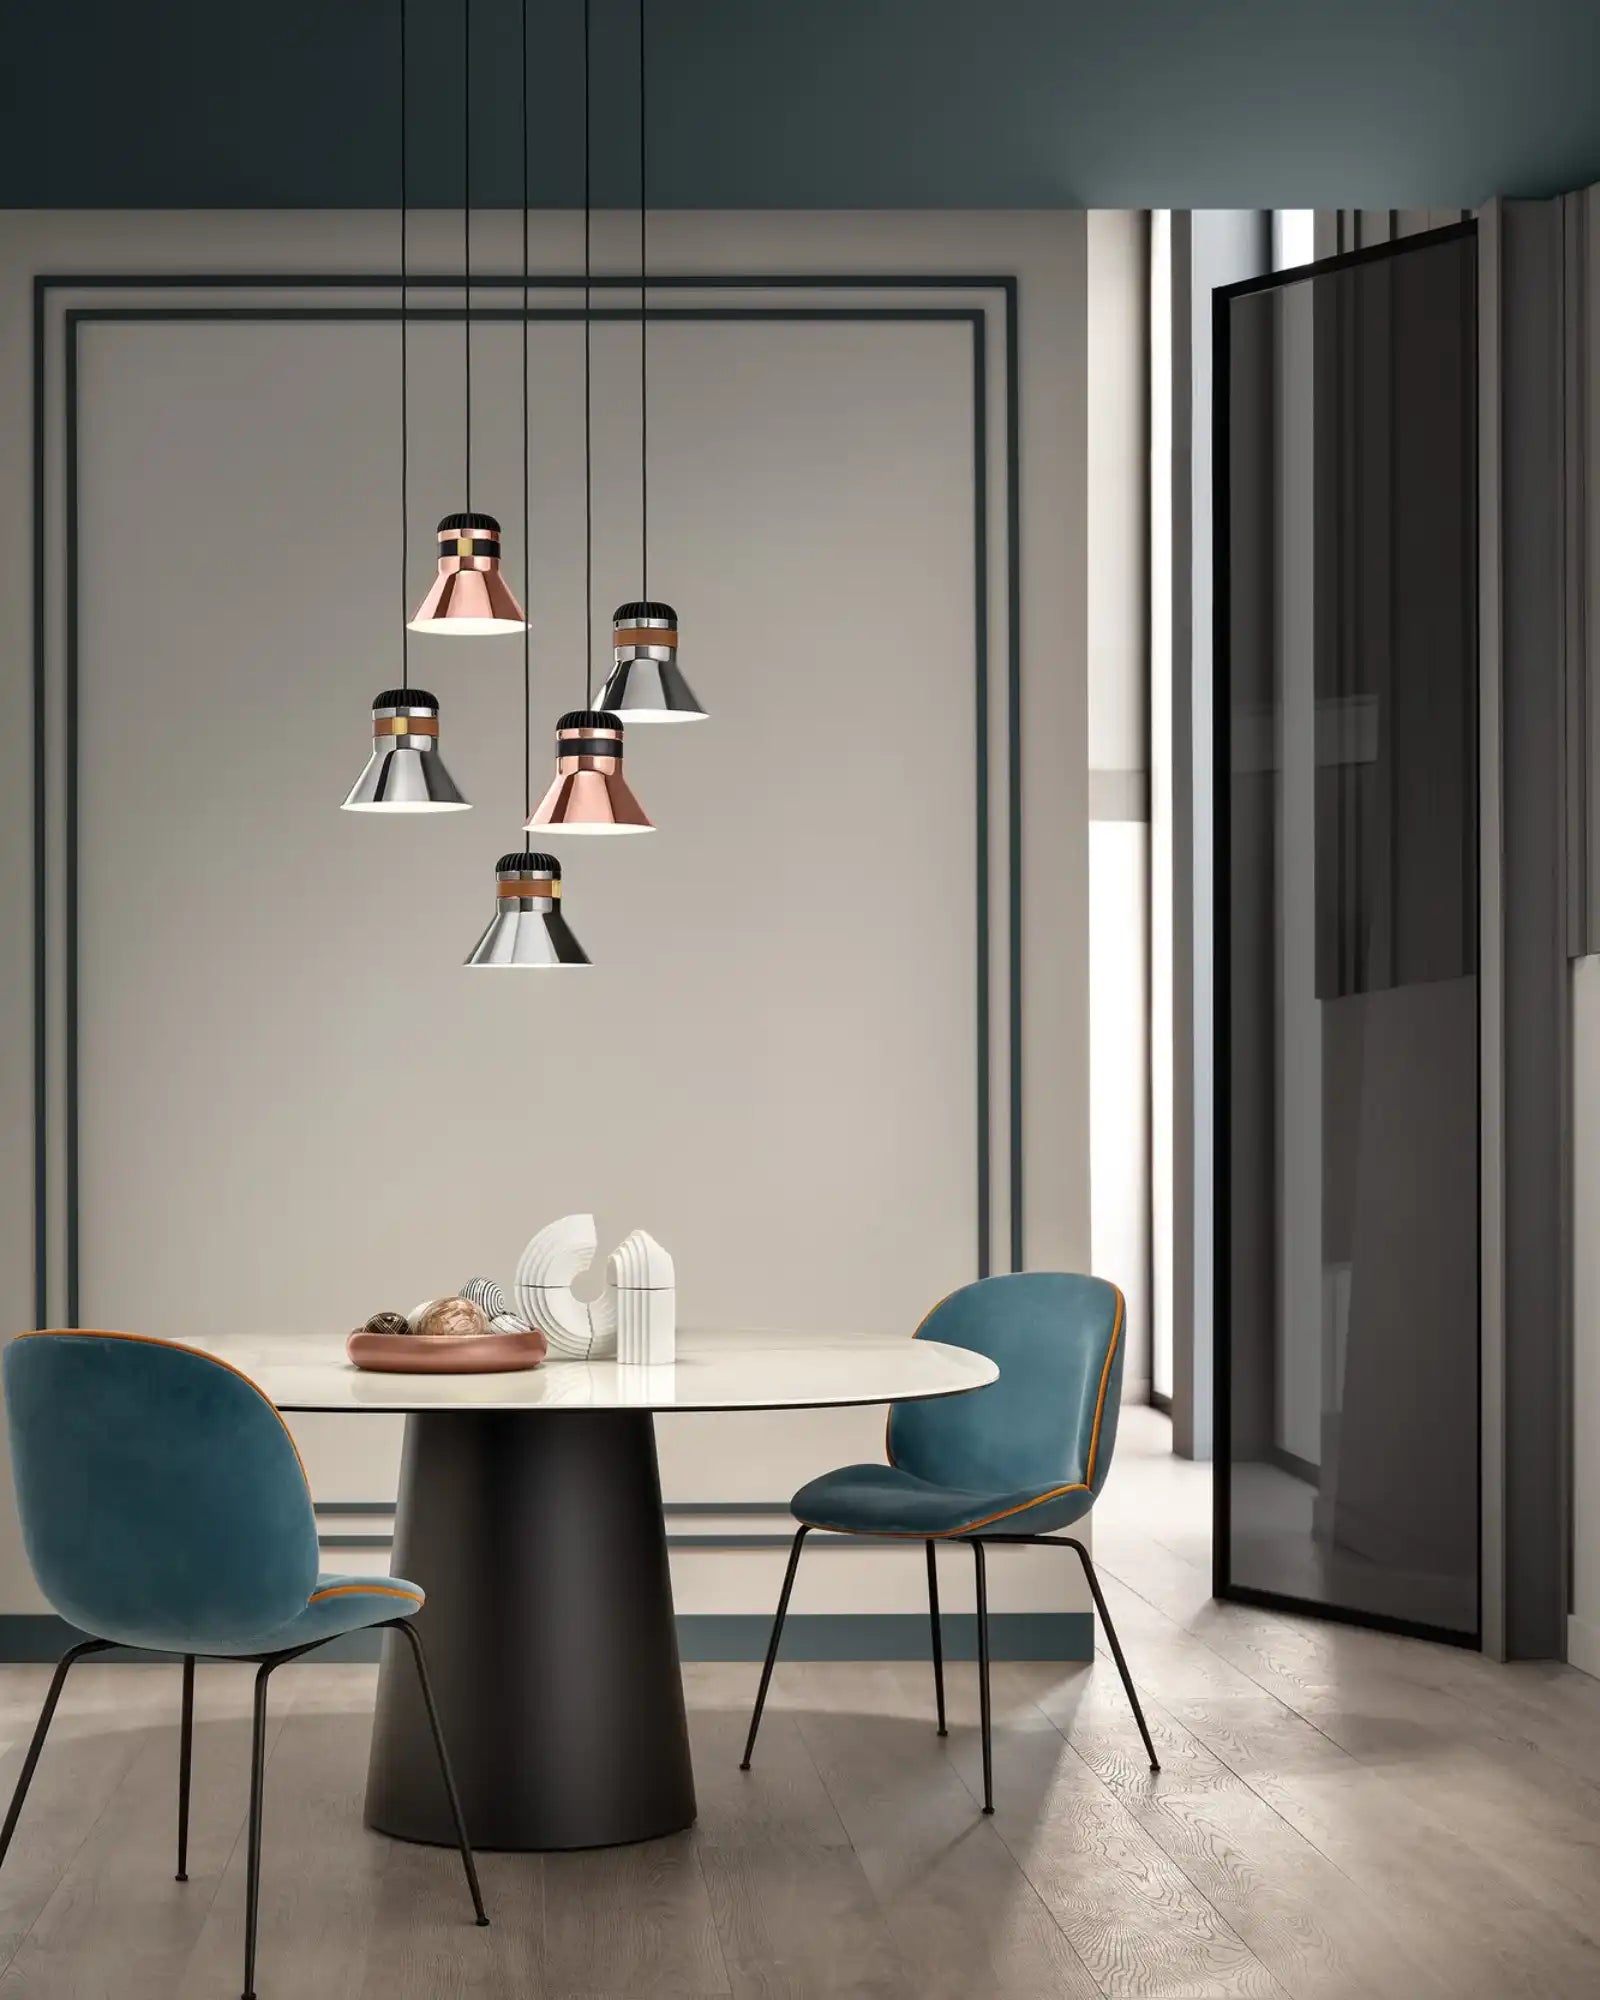 Cordea Pendant Light by Masiero Lighting featured within a modern dining room | Nook Collections